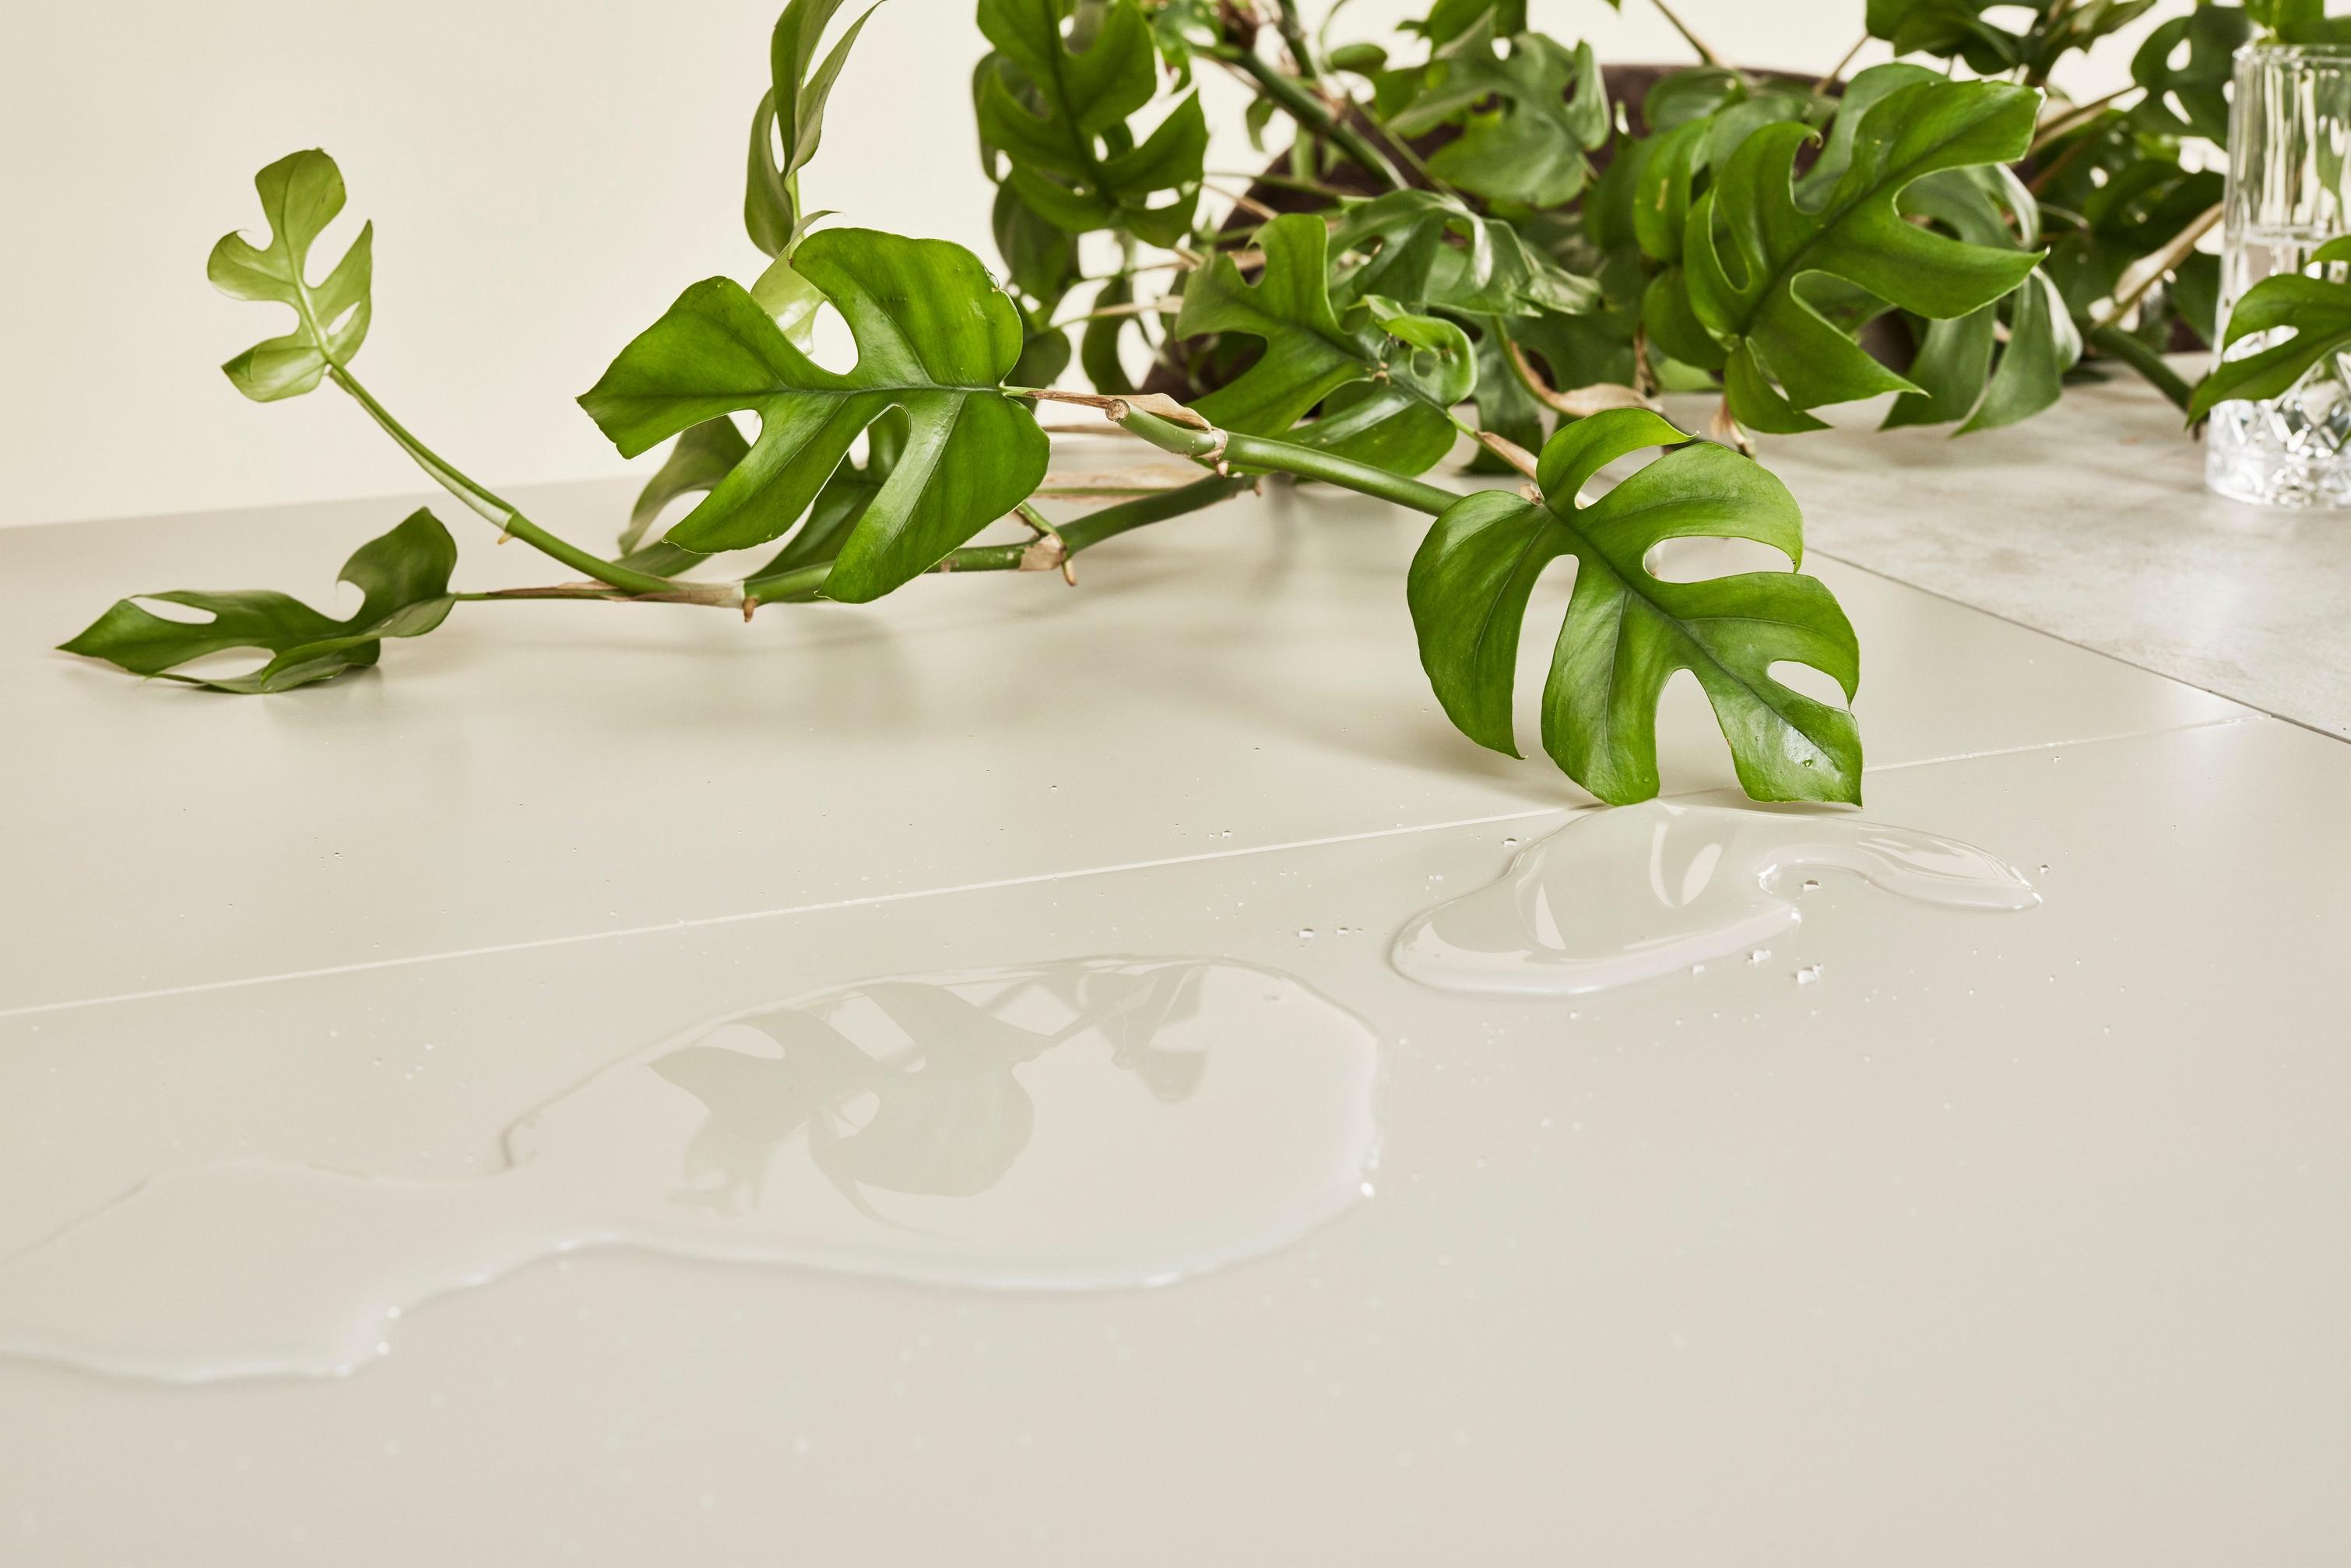 Green Monstera on a lacquered table, with a clear water spill reflecting leaves